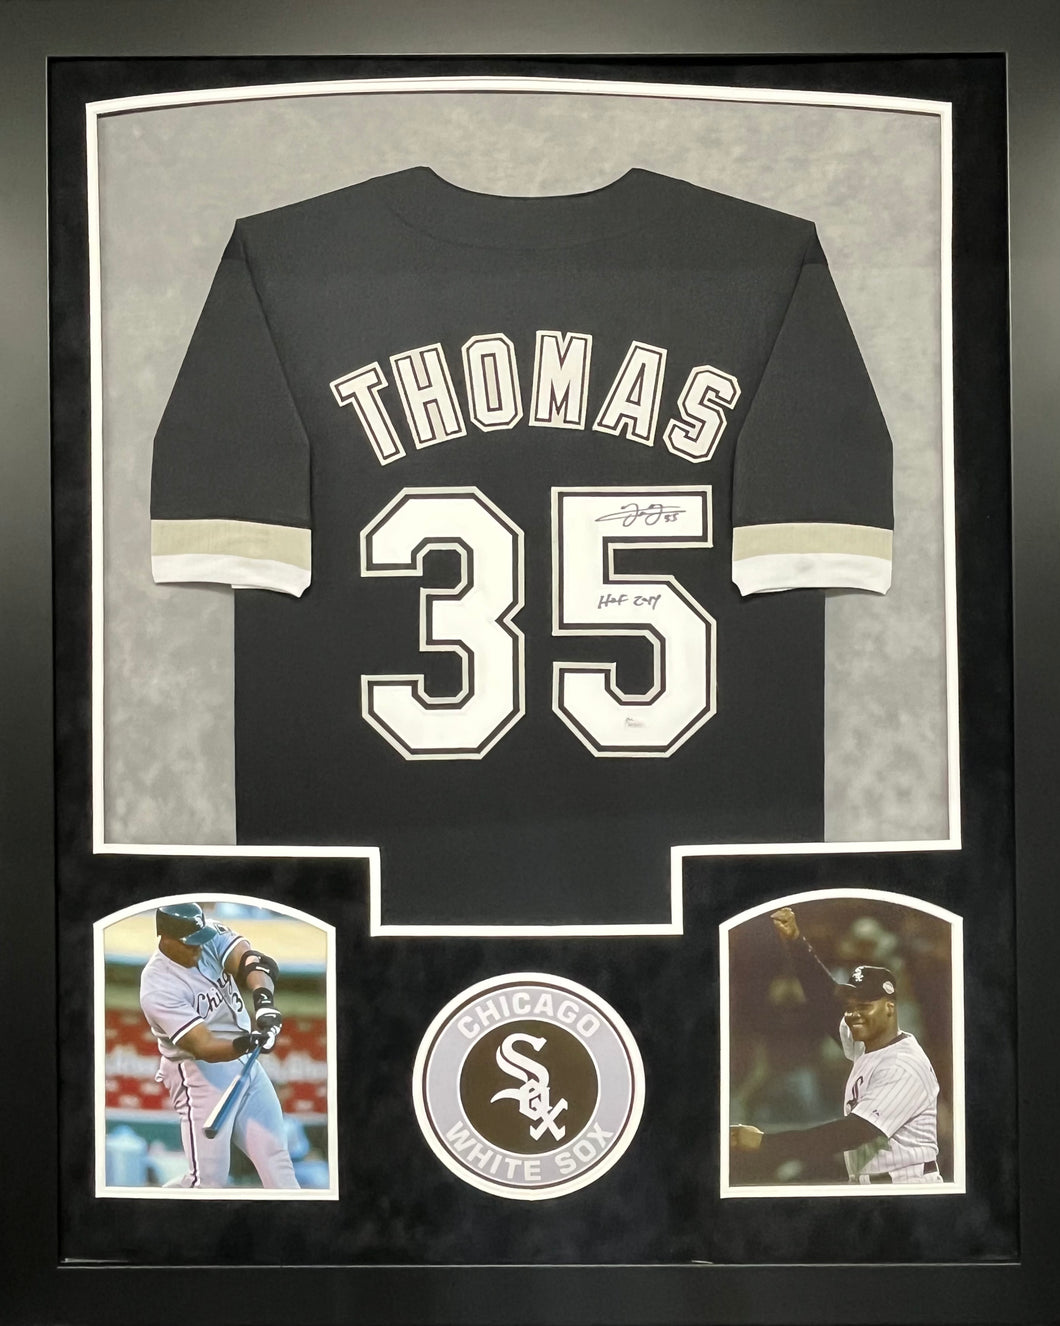 Chicago White Sox Frank Thomas Signed Custom Jersey with HOF 2014 Inscription Framed & Suede Matted with JSA COA